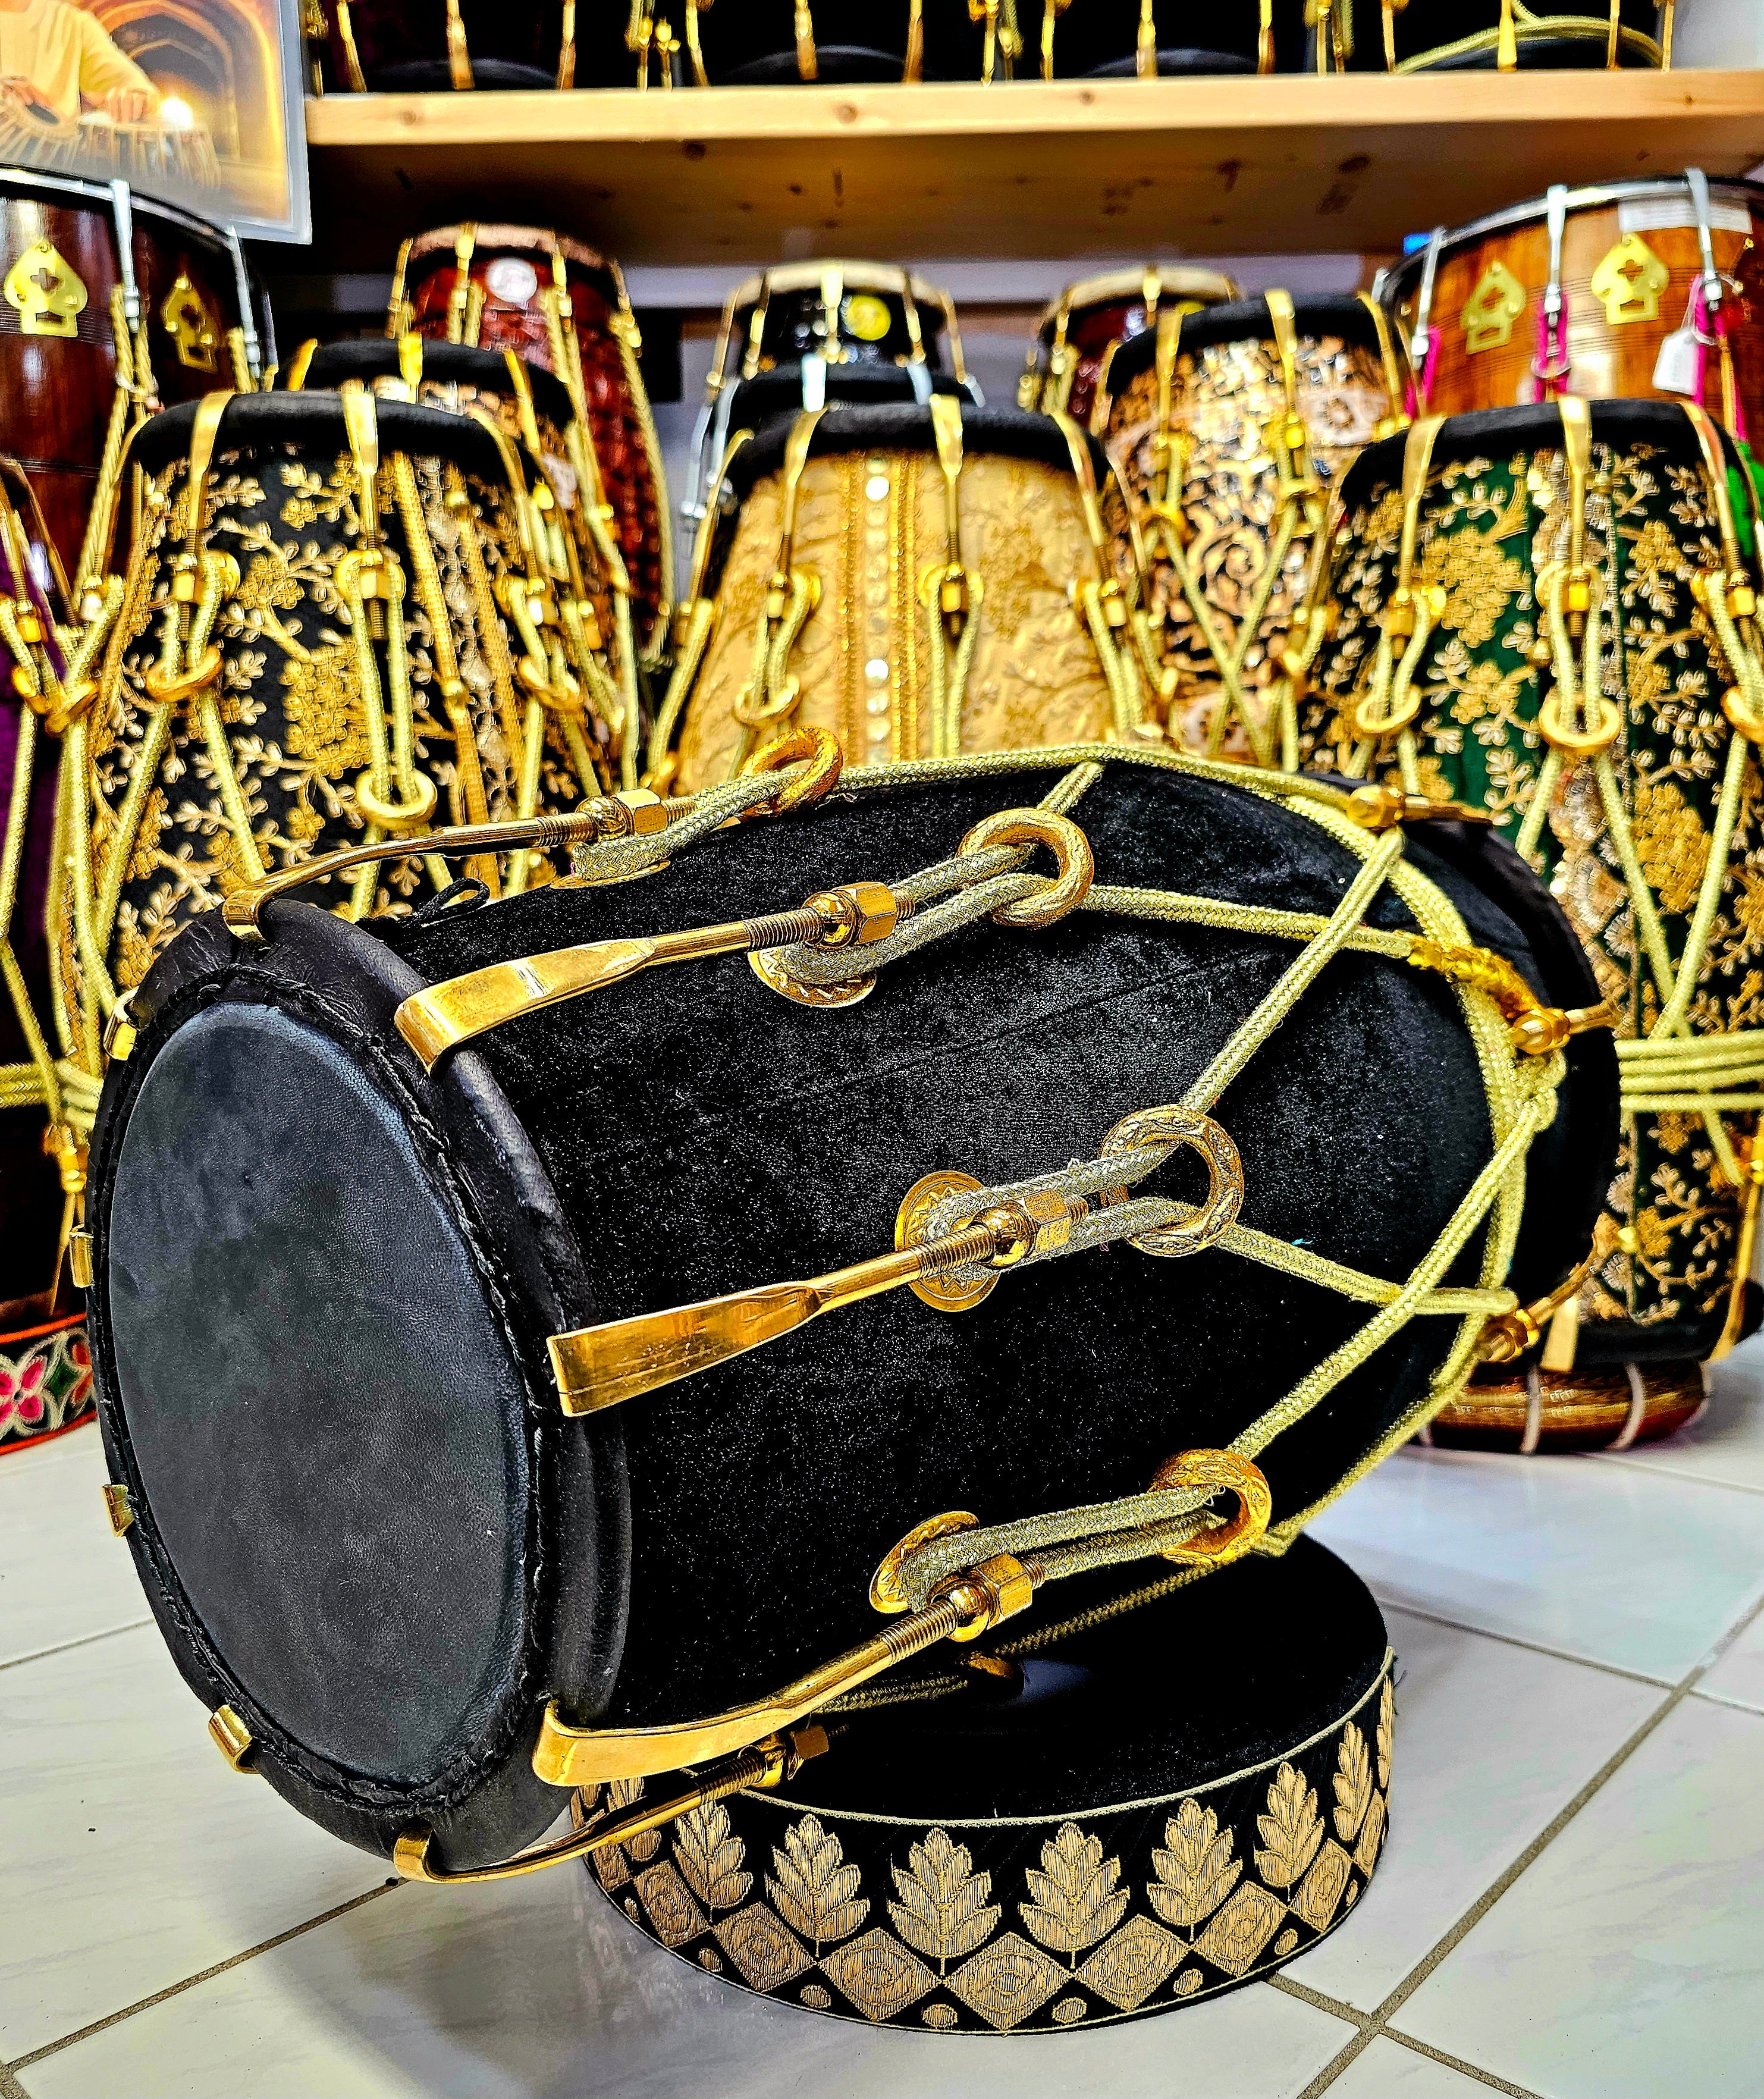 Obsidian Echo™ Velvet-Wrapped Red Sheesham Dholak with Minor Skin Discoloration (BLACK FRIDAY SALE!)